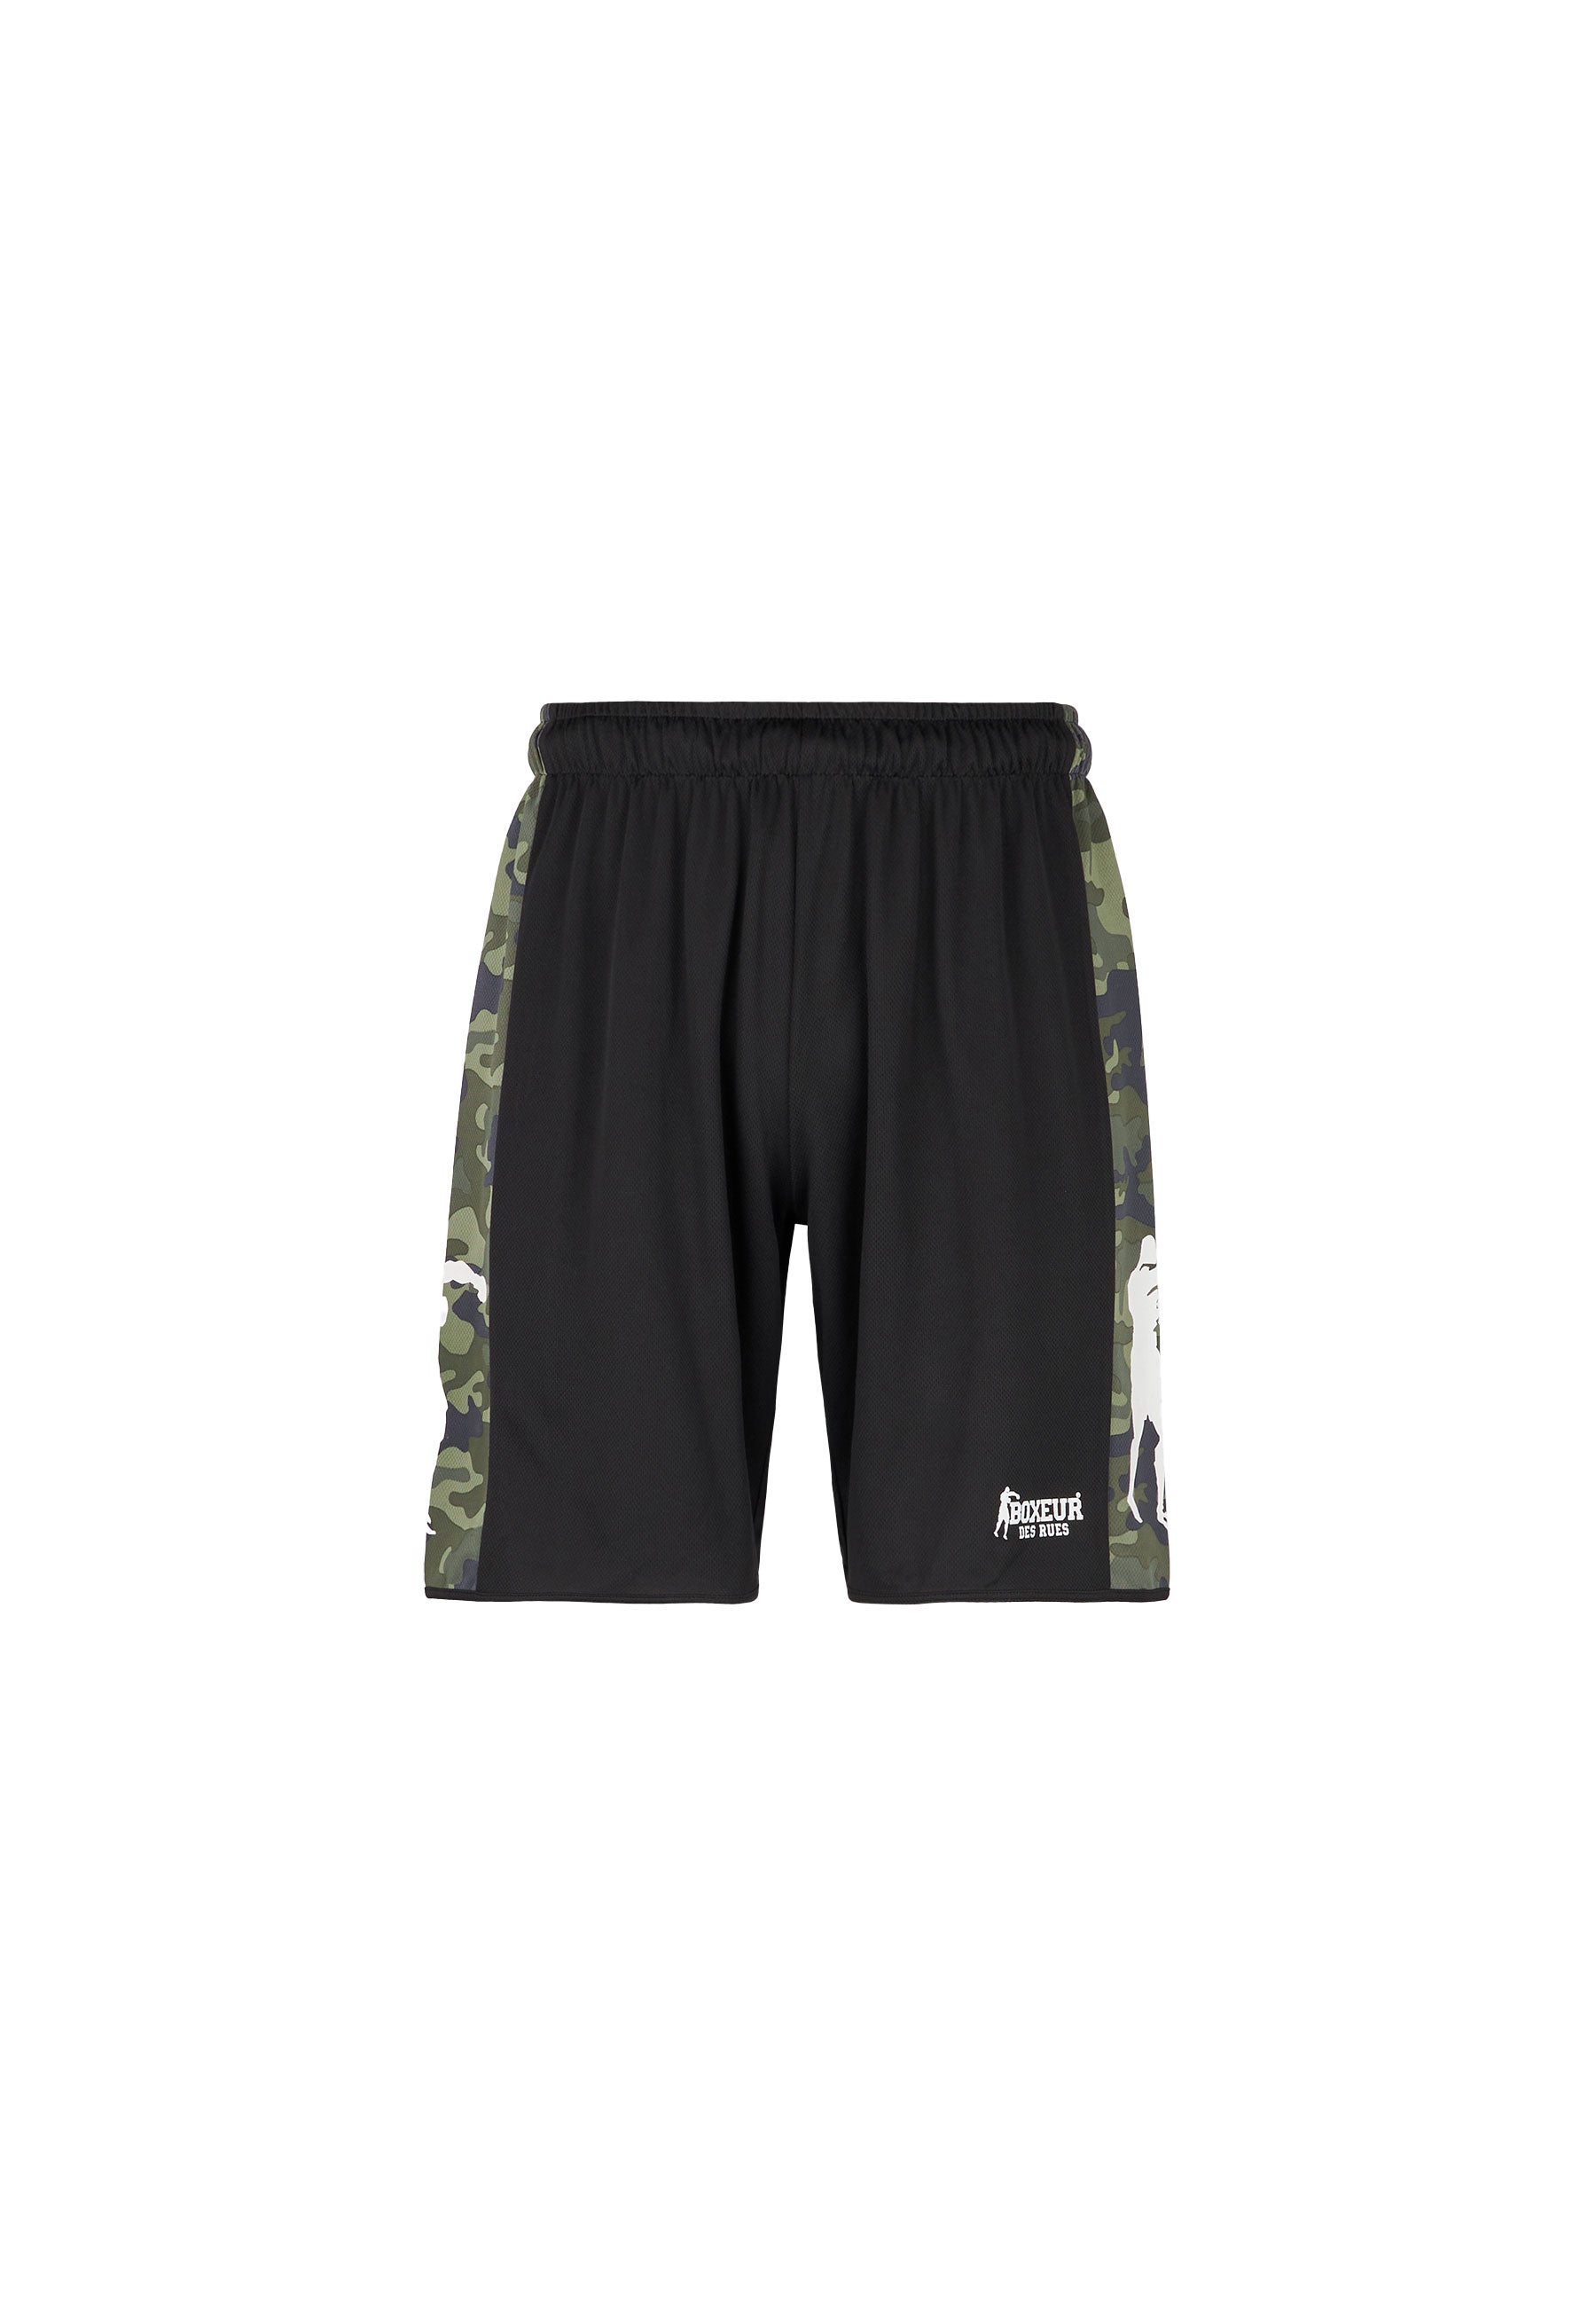 Soccer Basic Shorts in Camou Shorts Boxeur des Rues   